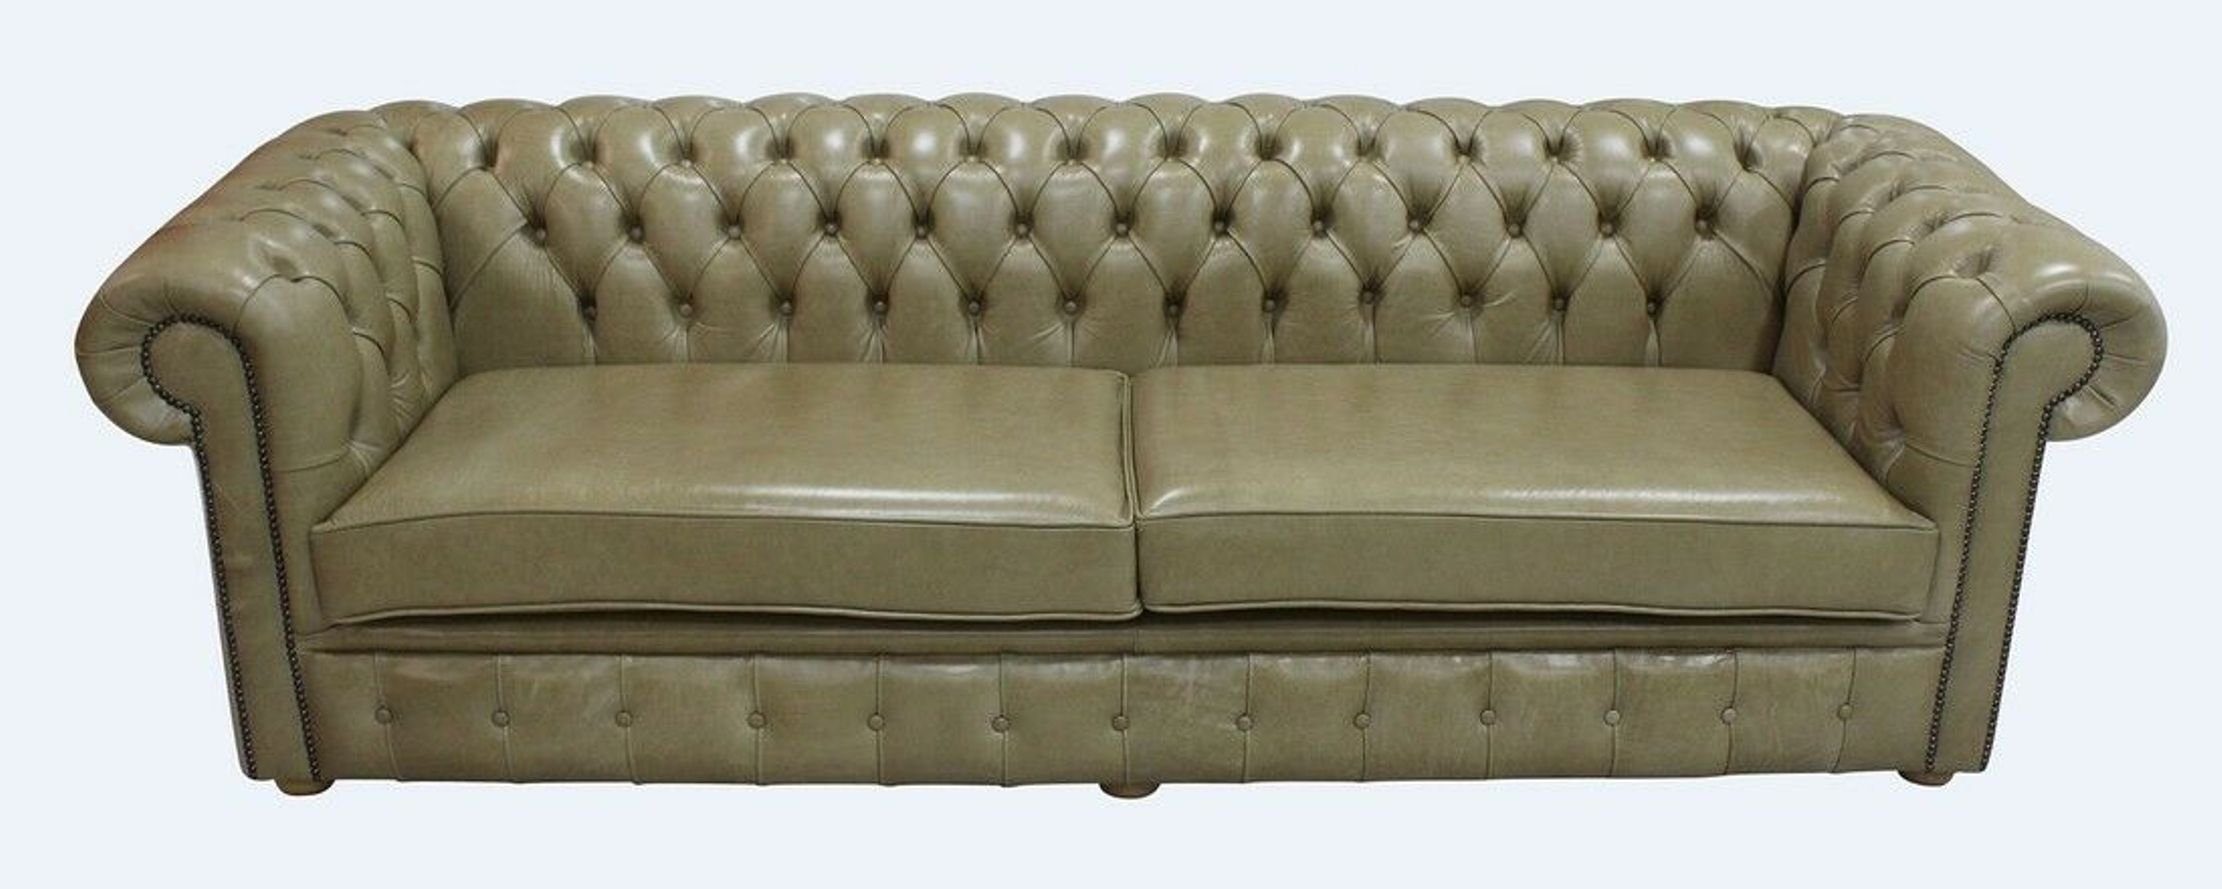 JVmoebel Chesterfield-Sofa, Chesterfield Design Luxus Polster Sofa Couch